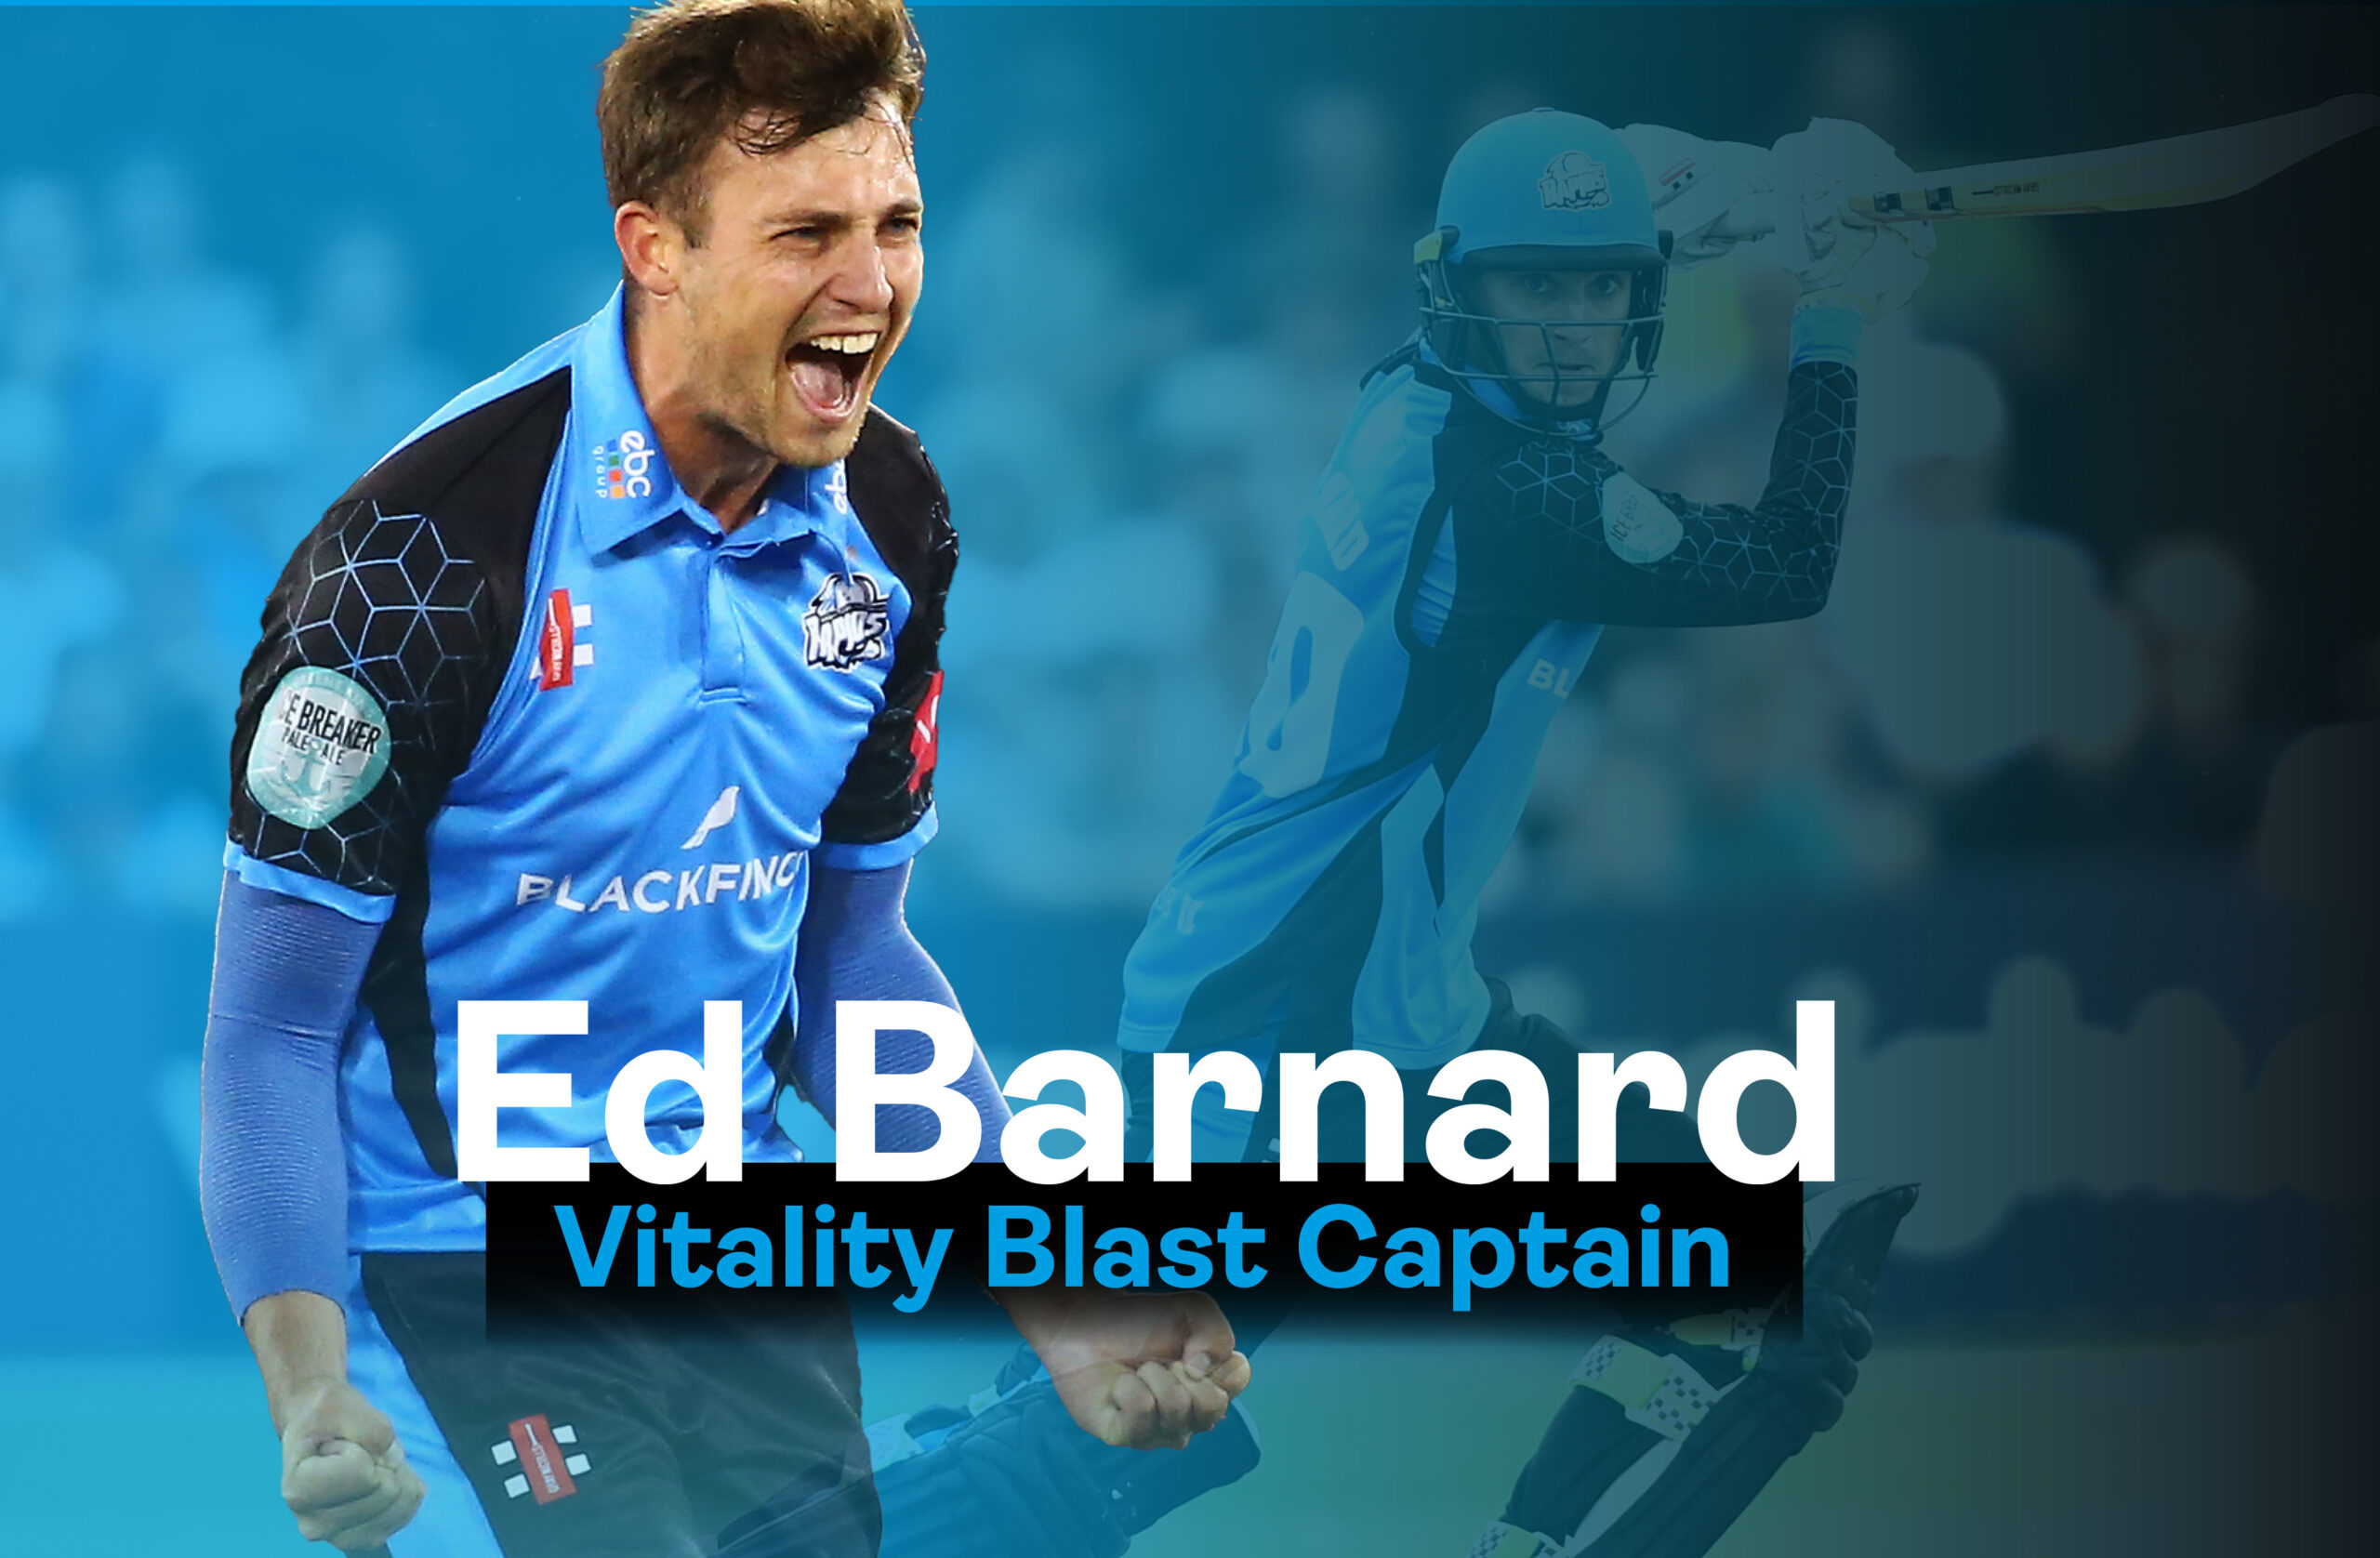 ED BARNARD TO CAPTAIN RAPIDS DURING VITALITY BLAST CAMPAIGN